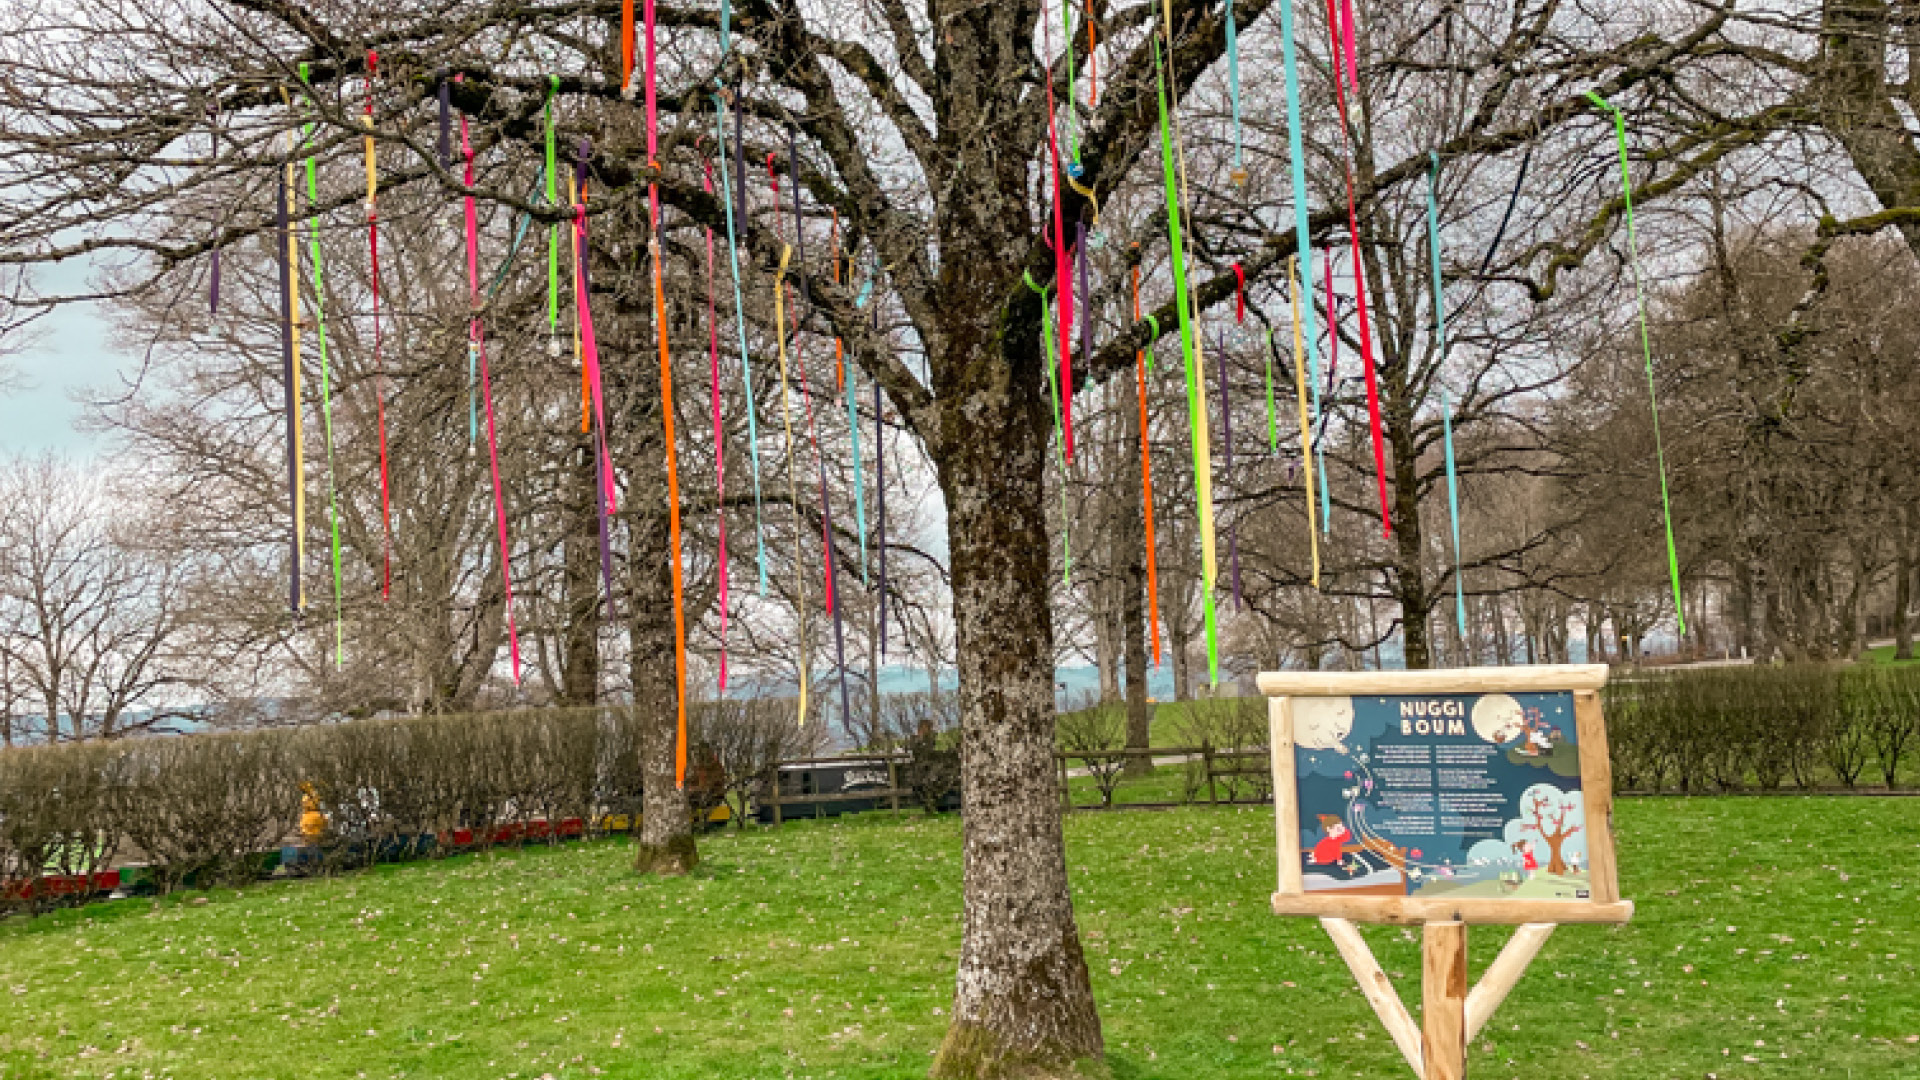 The newly inaugurated tree with colored cotton ribbons in the middle of the park.